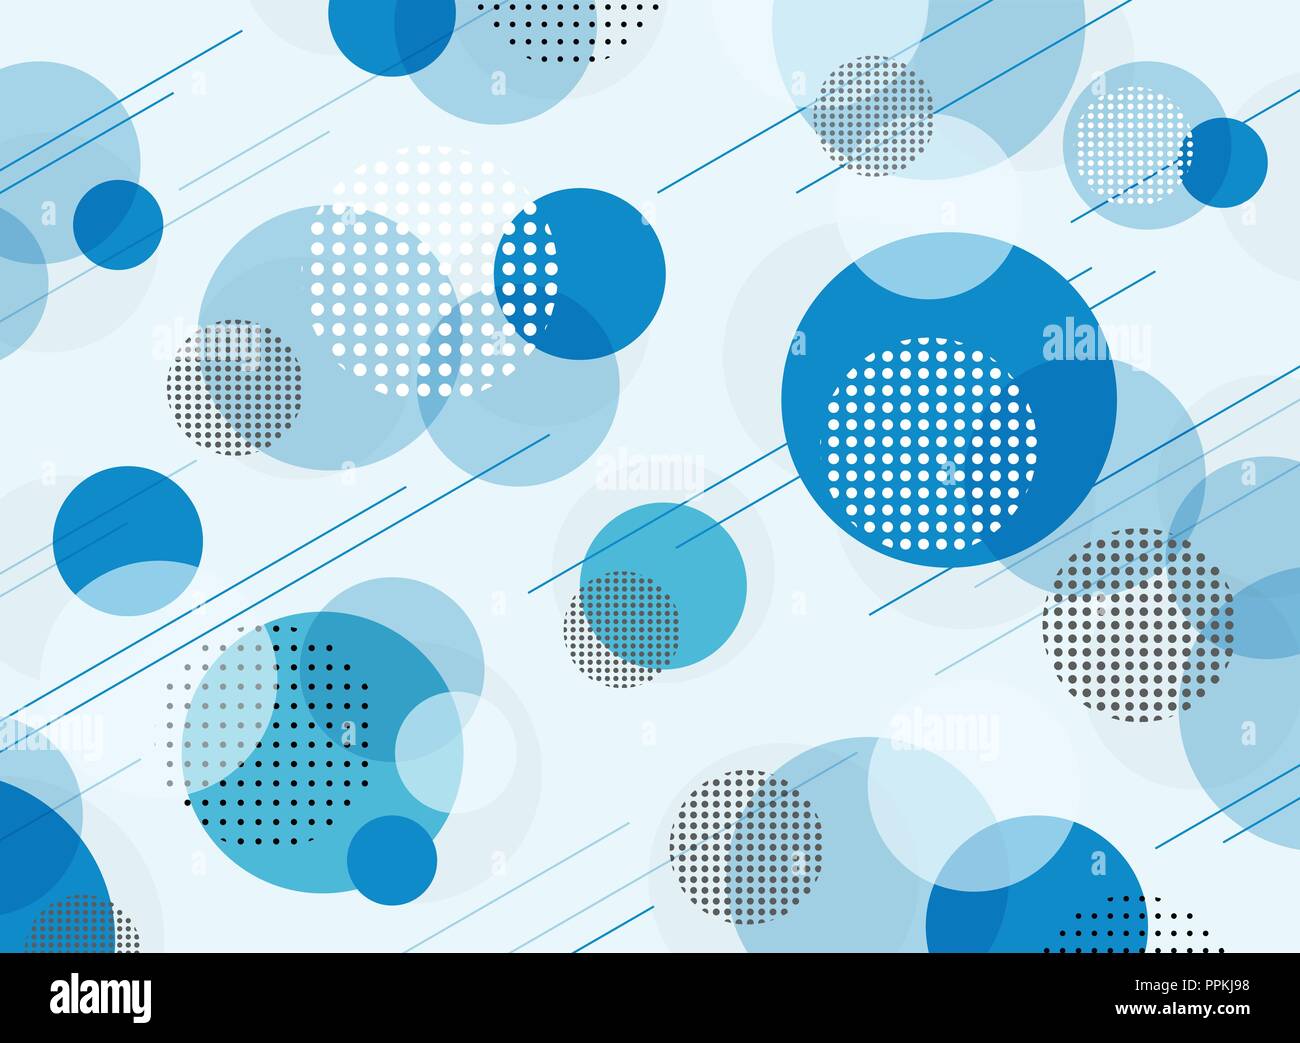 Abstract of simple blue geometric pattern background, illustration vector eps10 Stock Vector